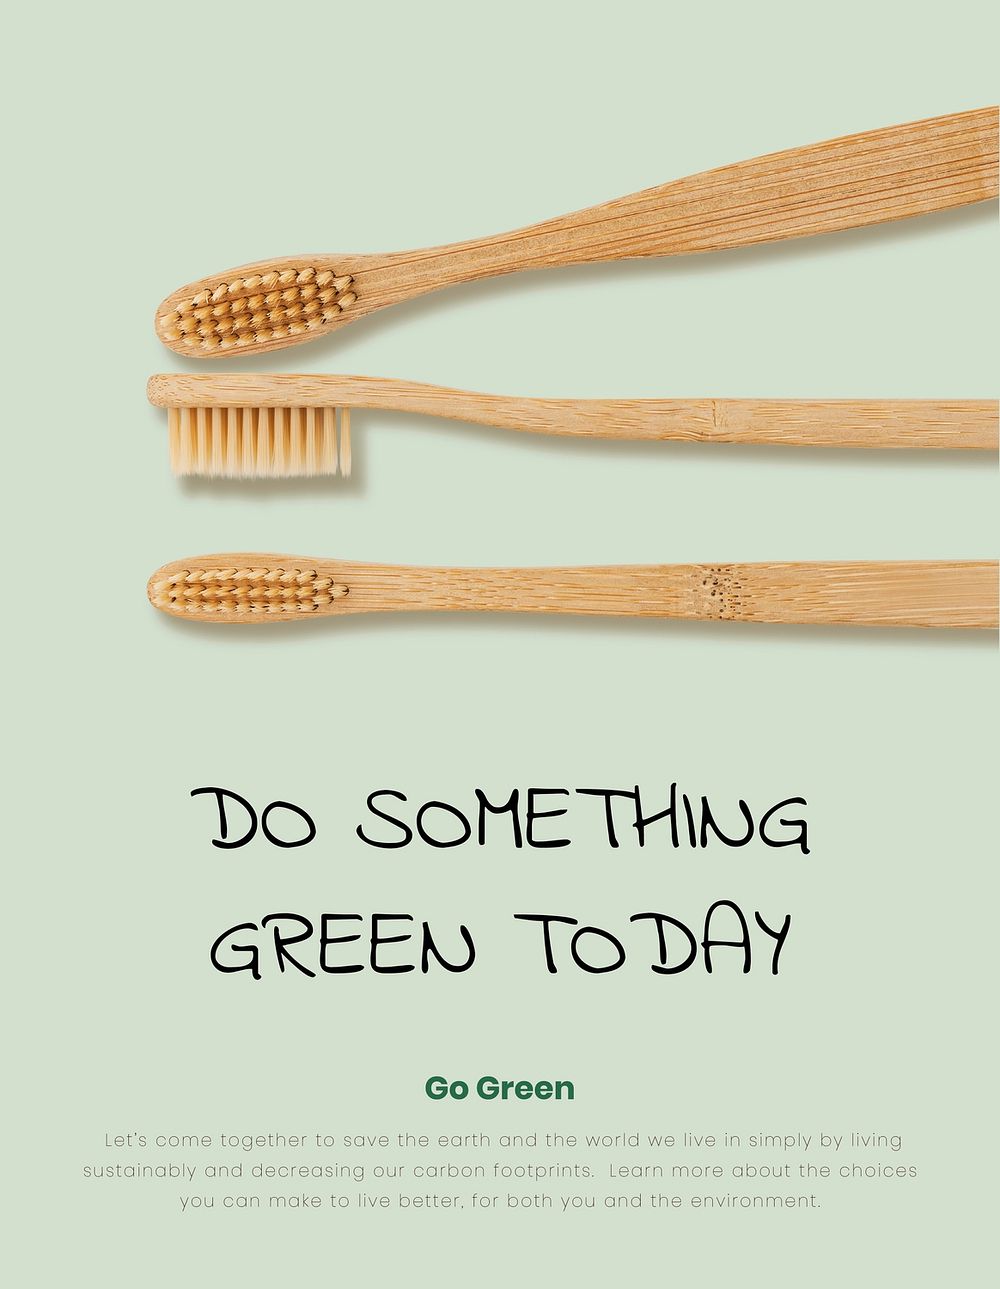 Bamboo toothbrushes poster template psd earth friendly living